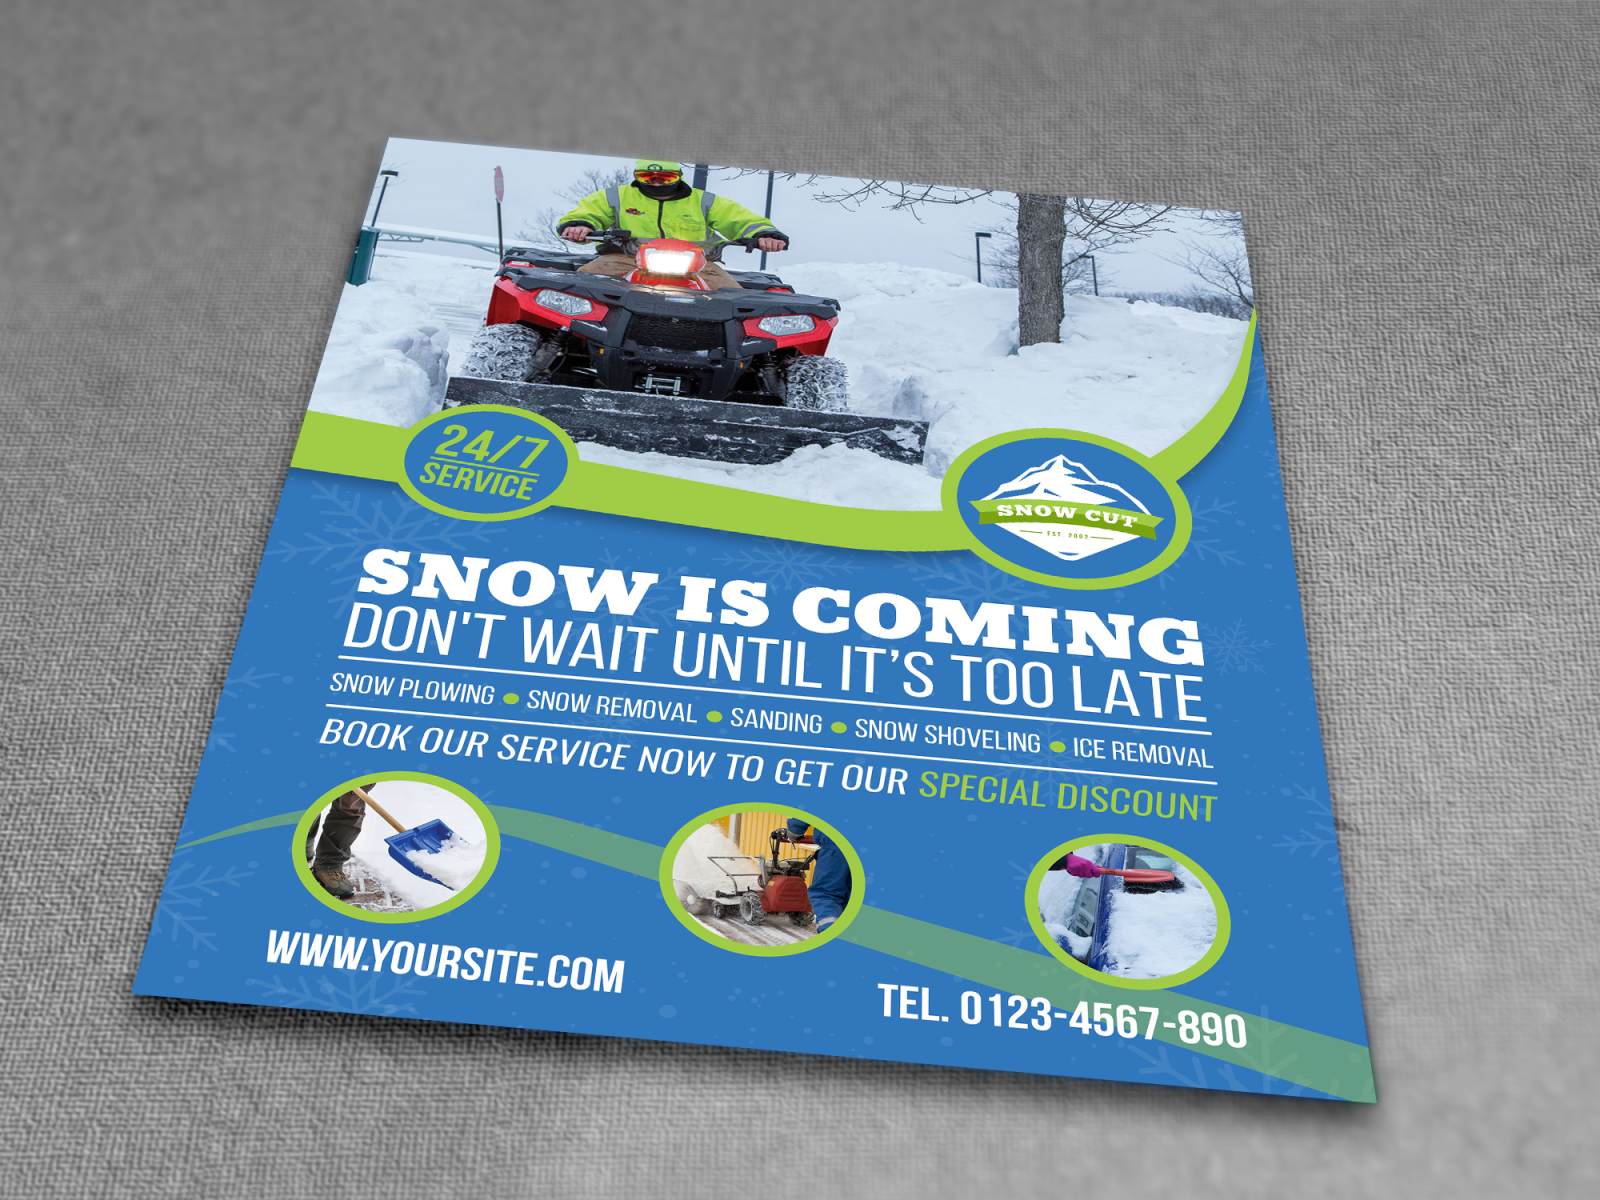 snow-removal-service-flyer-template-by-owpictures-on-dribbble